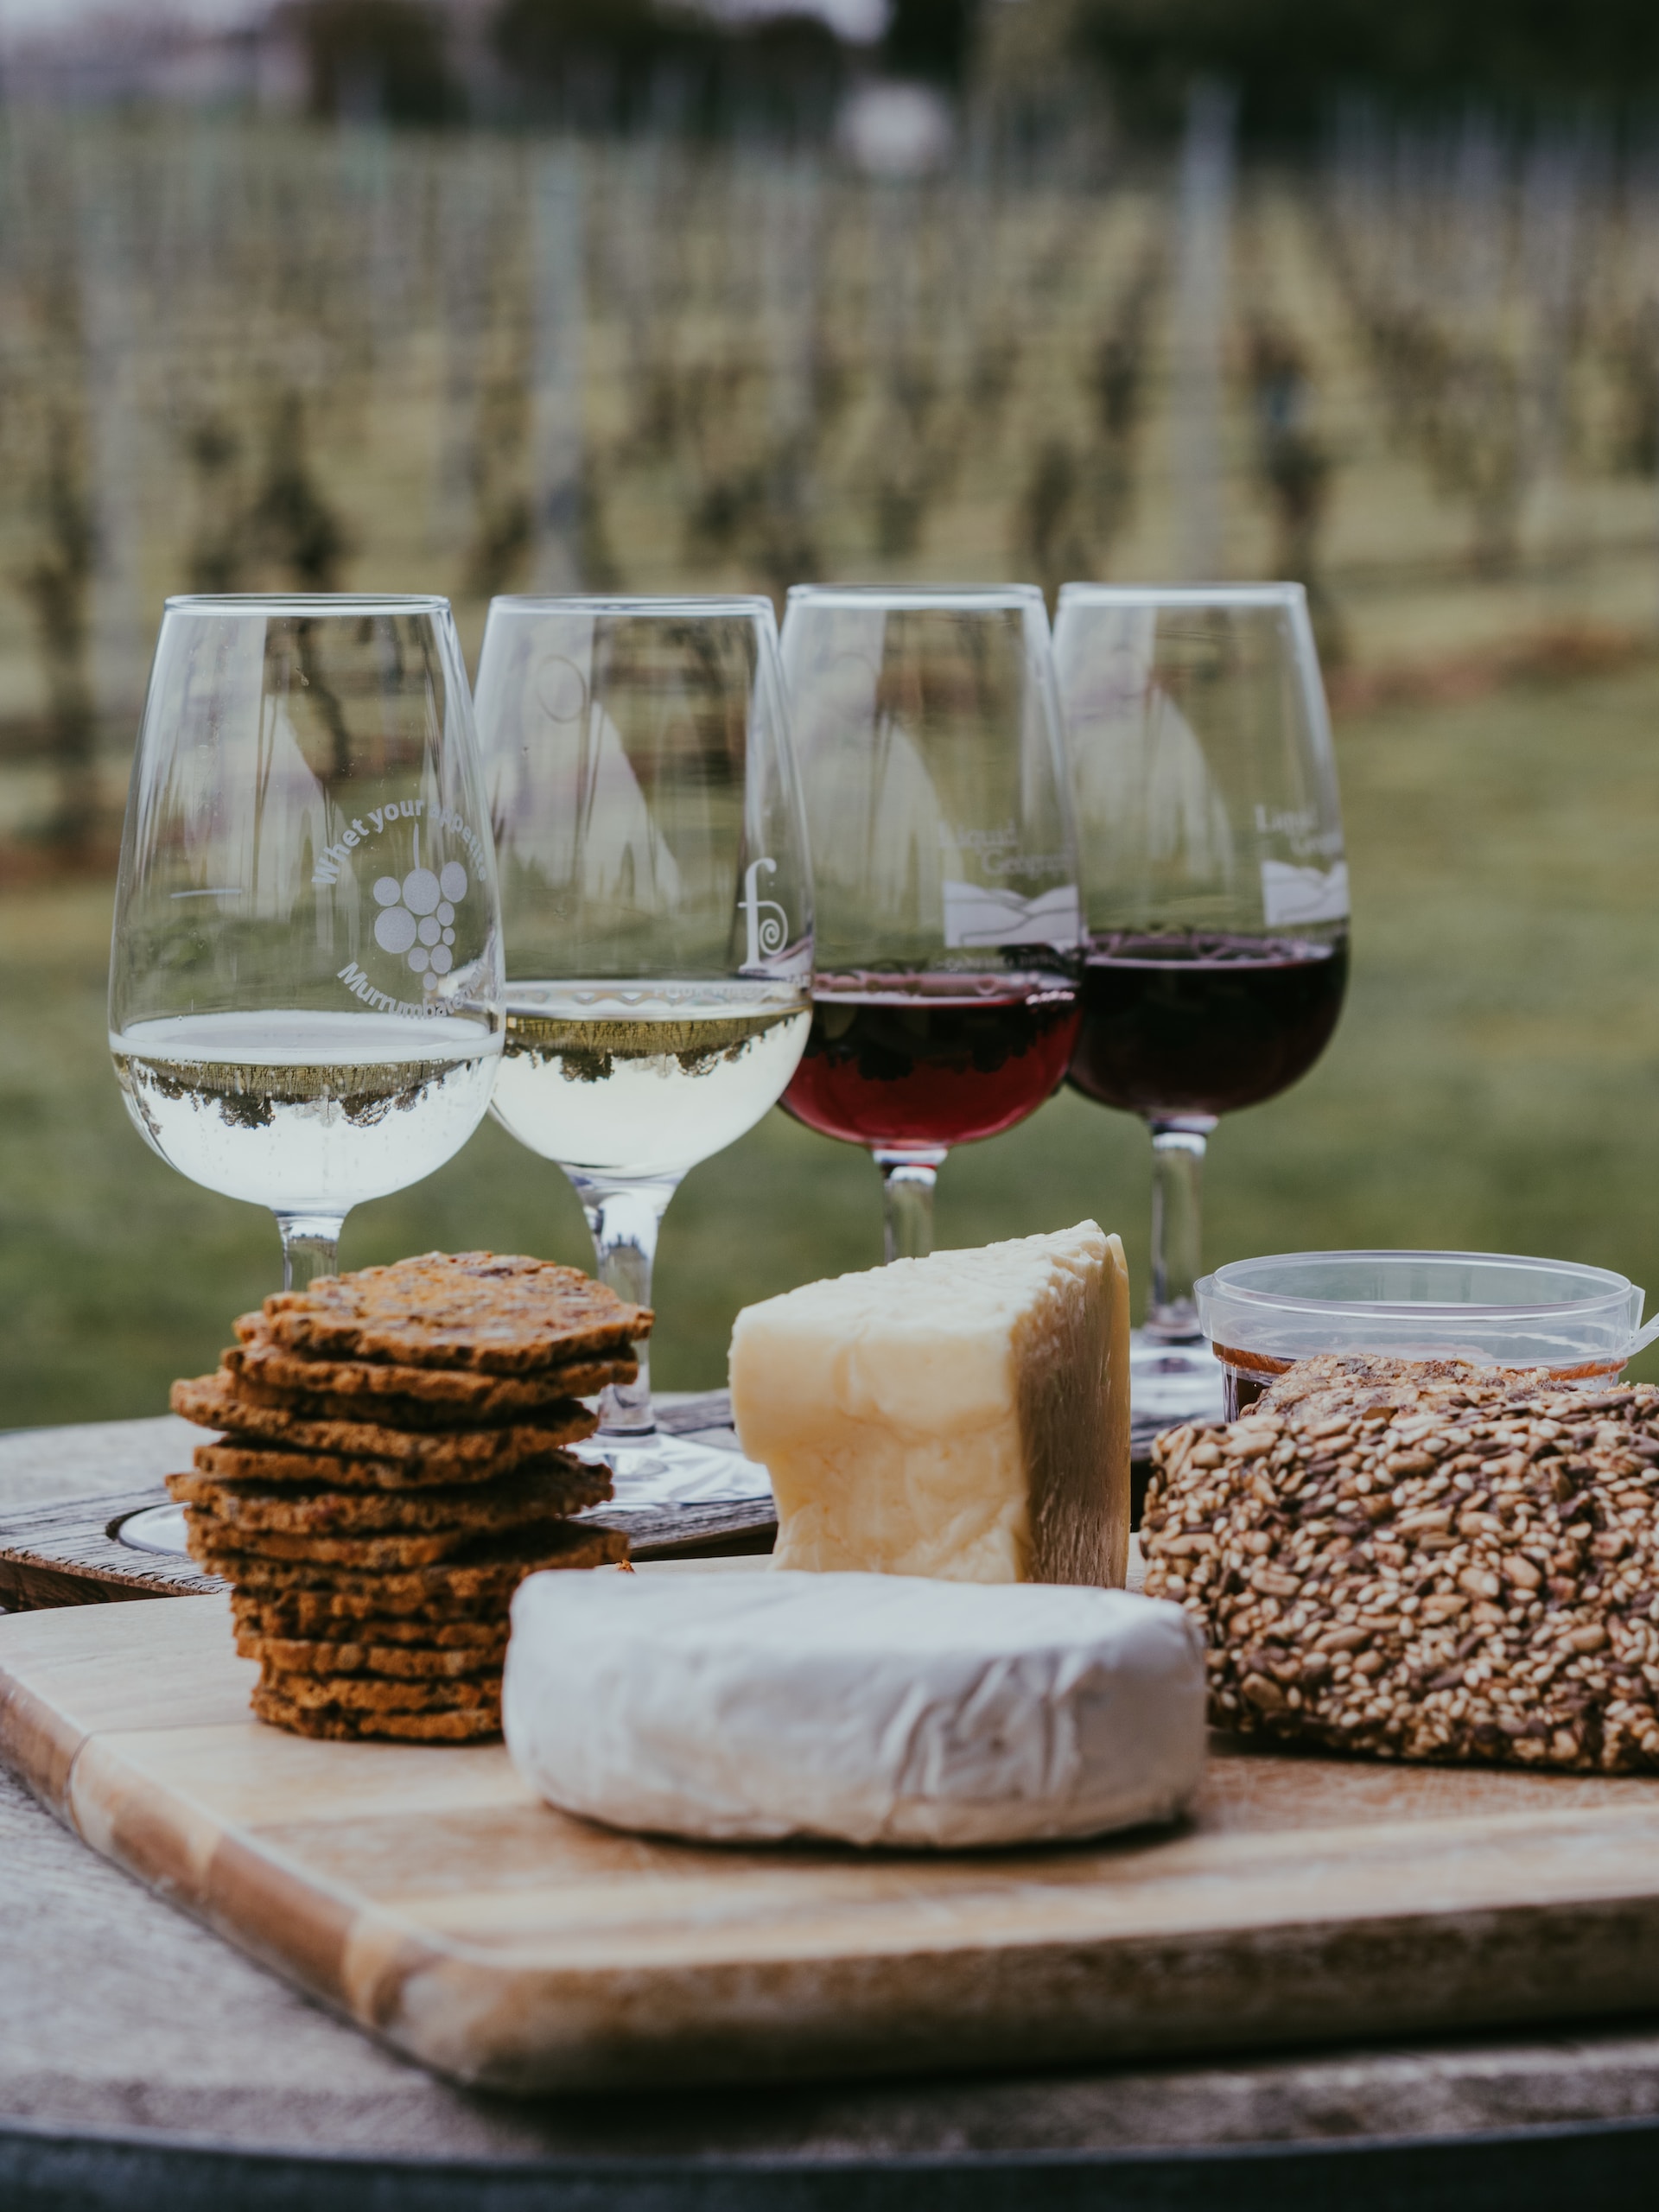 An image of Napa Valley wine and cheese.